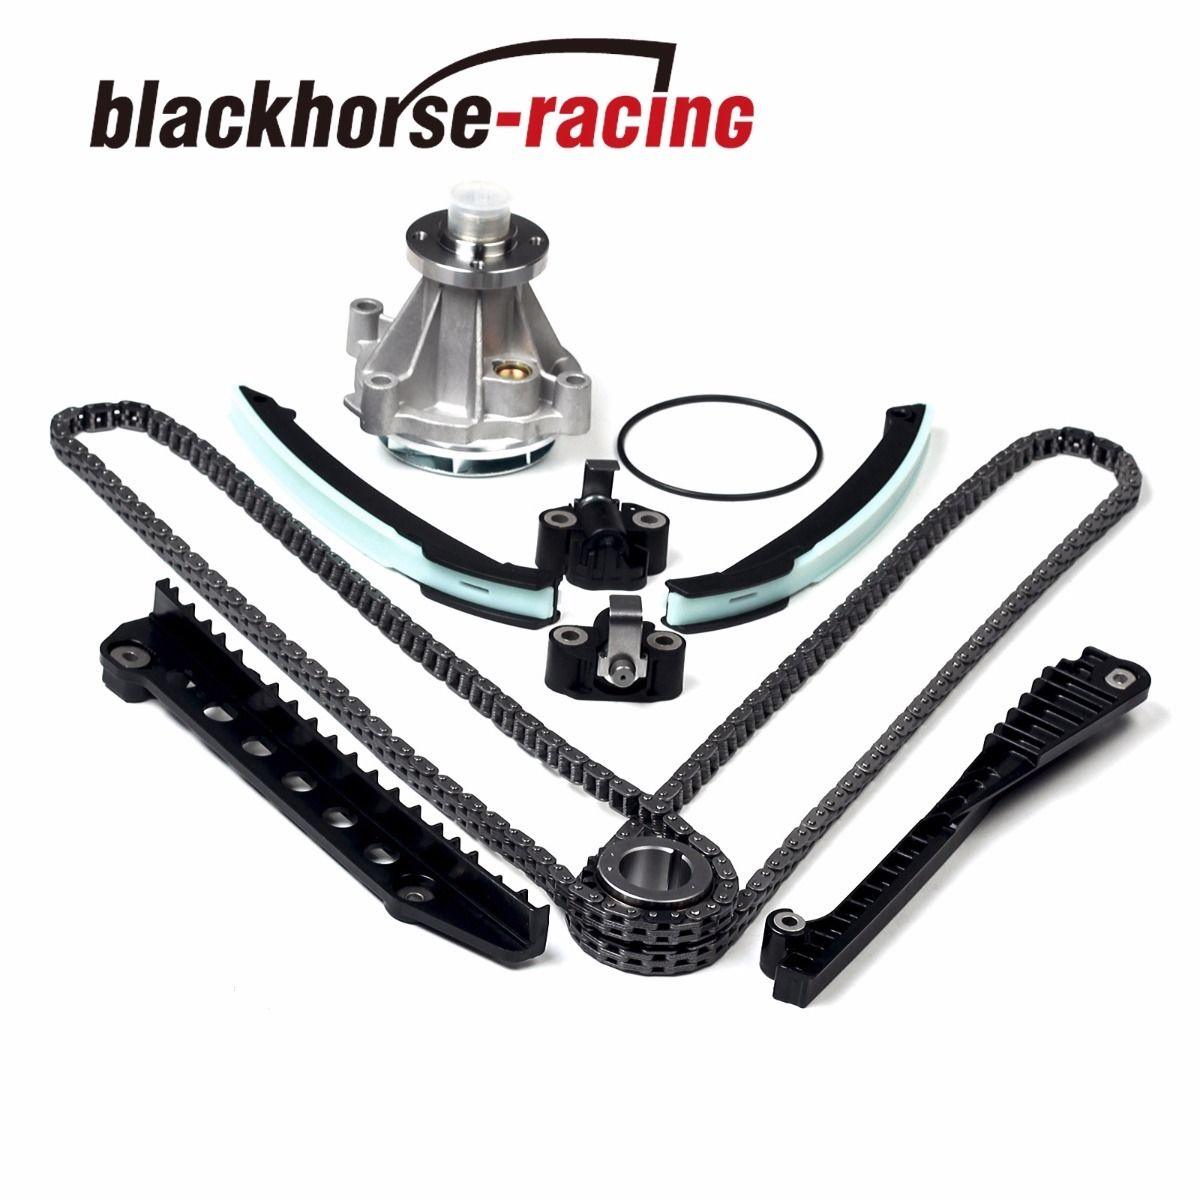 For Ford F150 F250 F350 Lincoln 5.4L 3V Timing Chain+Water Pump Kit